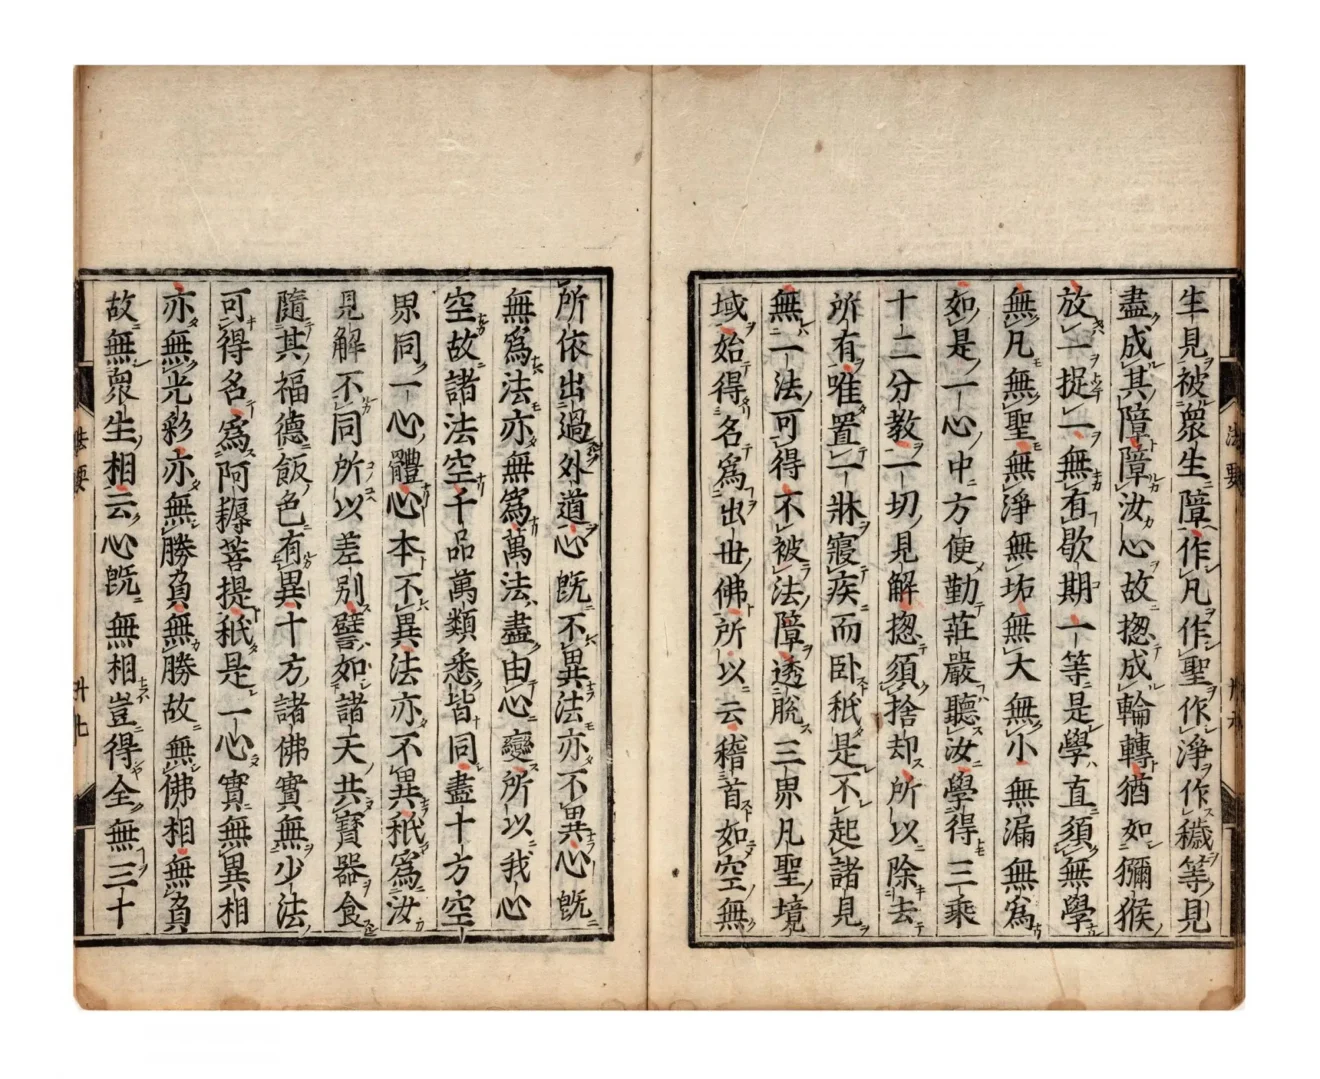 Huangbo's Transmission of Mind - Parts 1 to 9